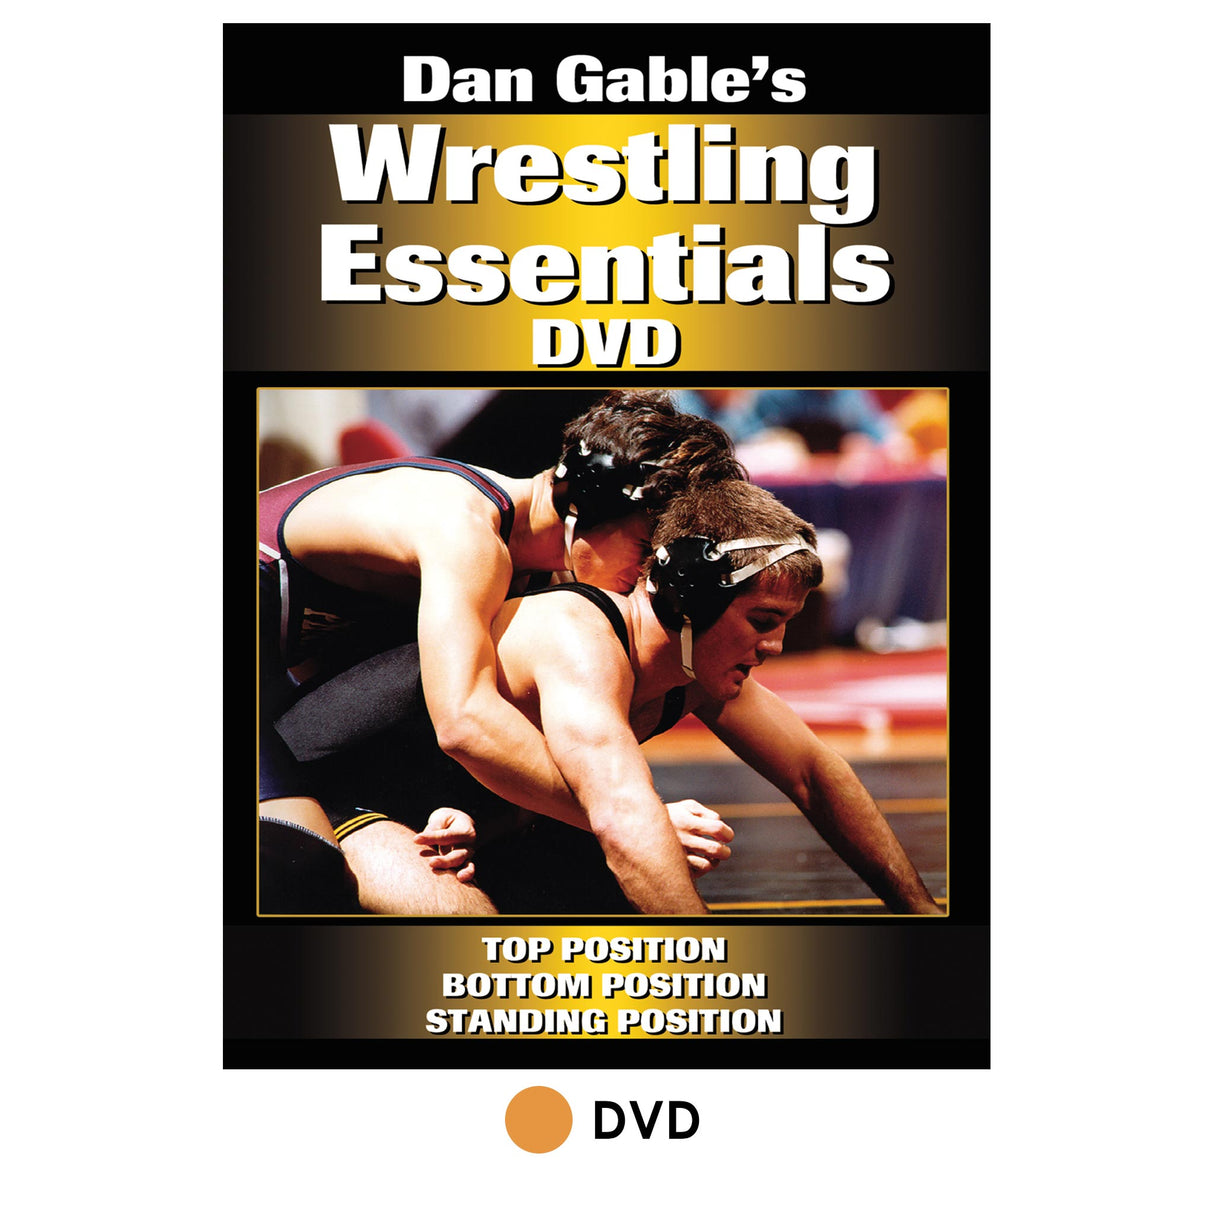 Dan Gable's Wrestling Essentials Complete Collection DVD